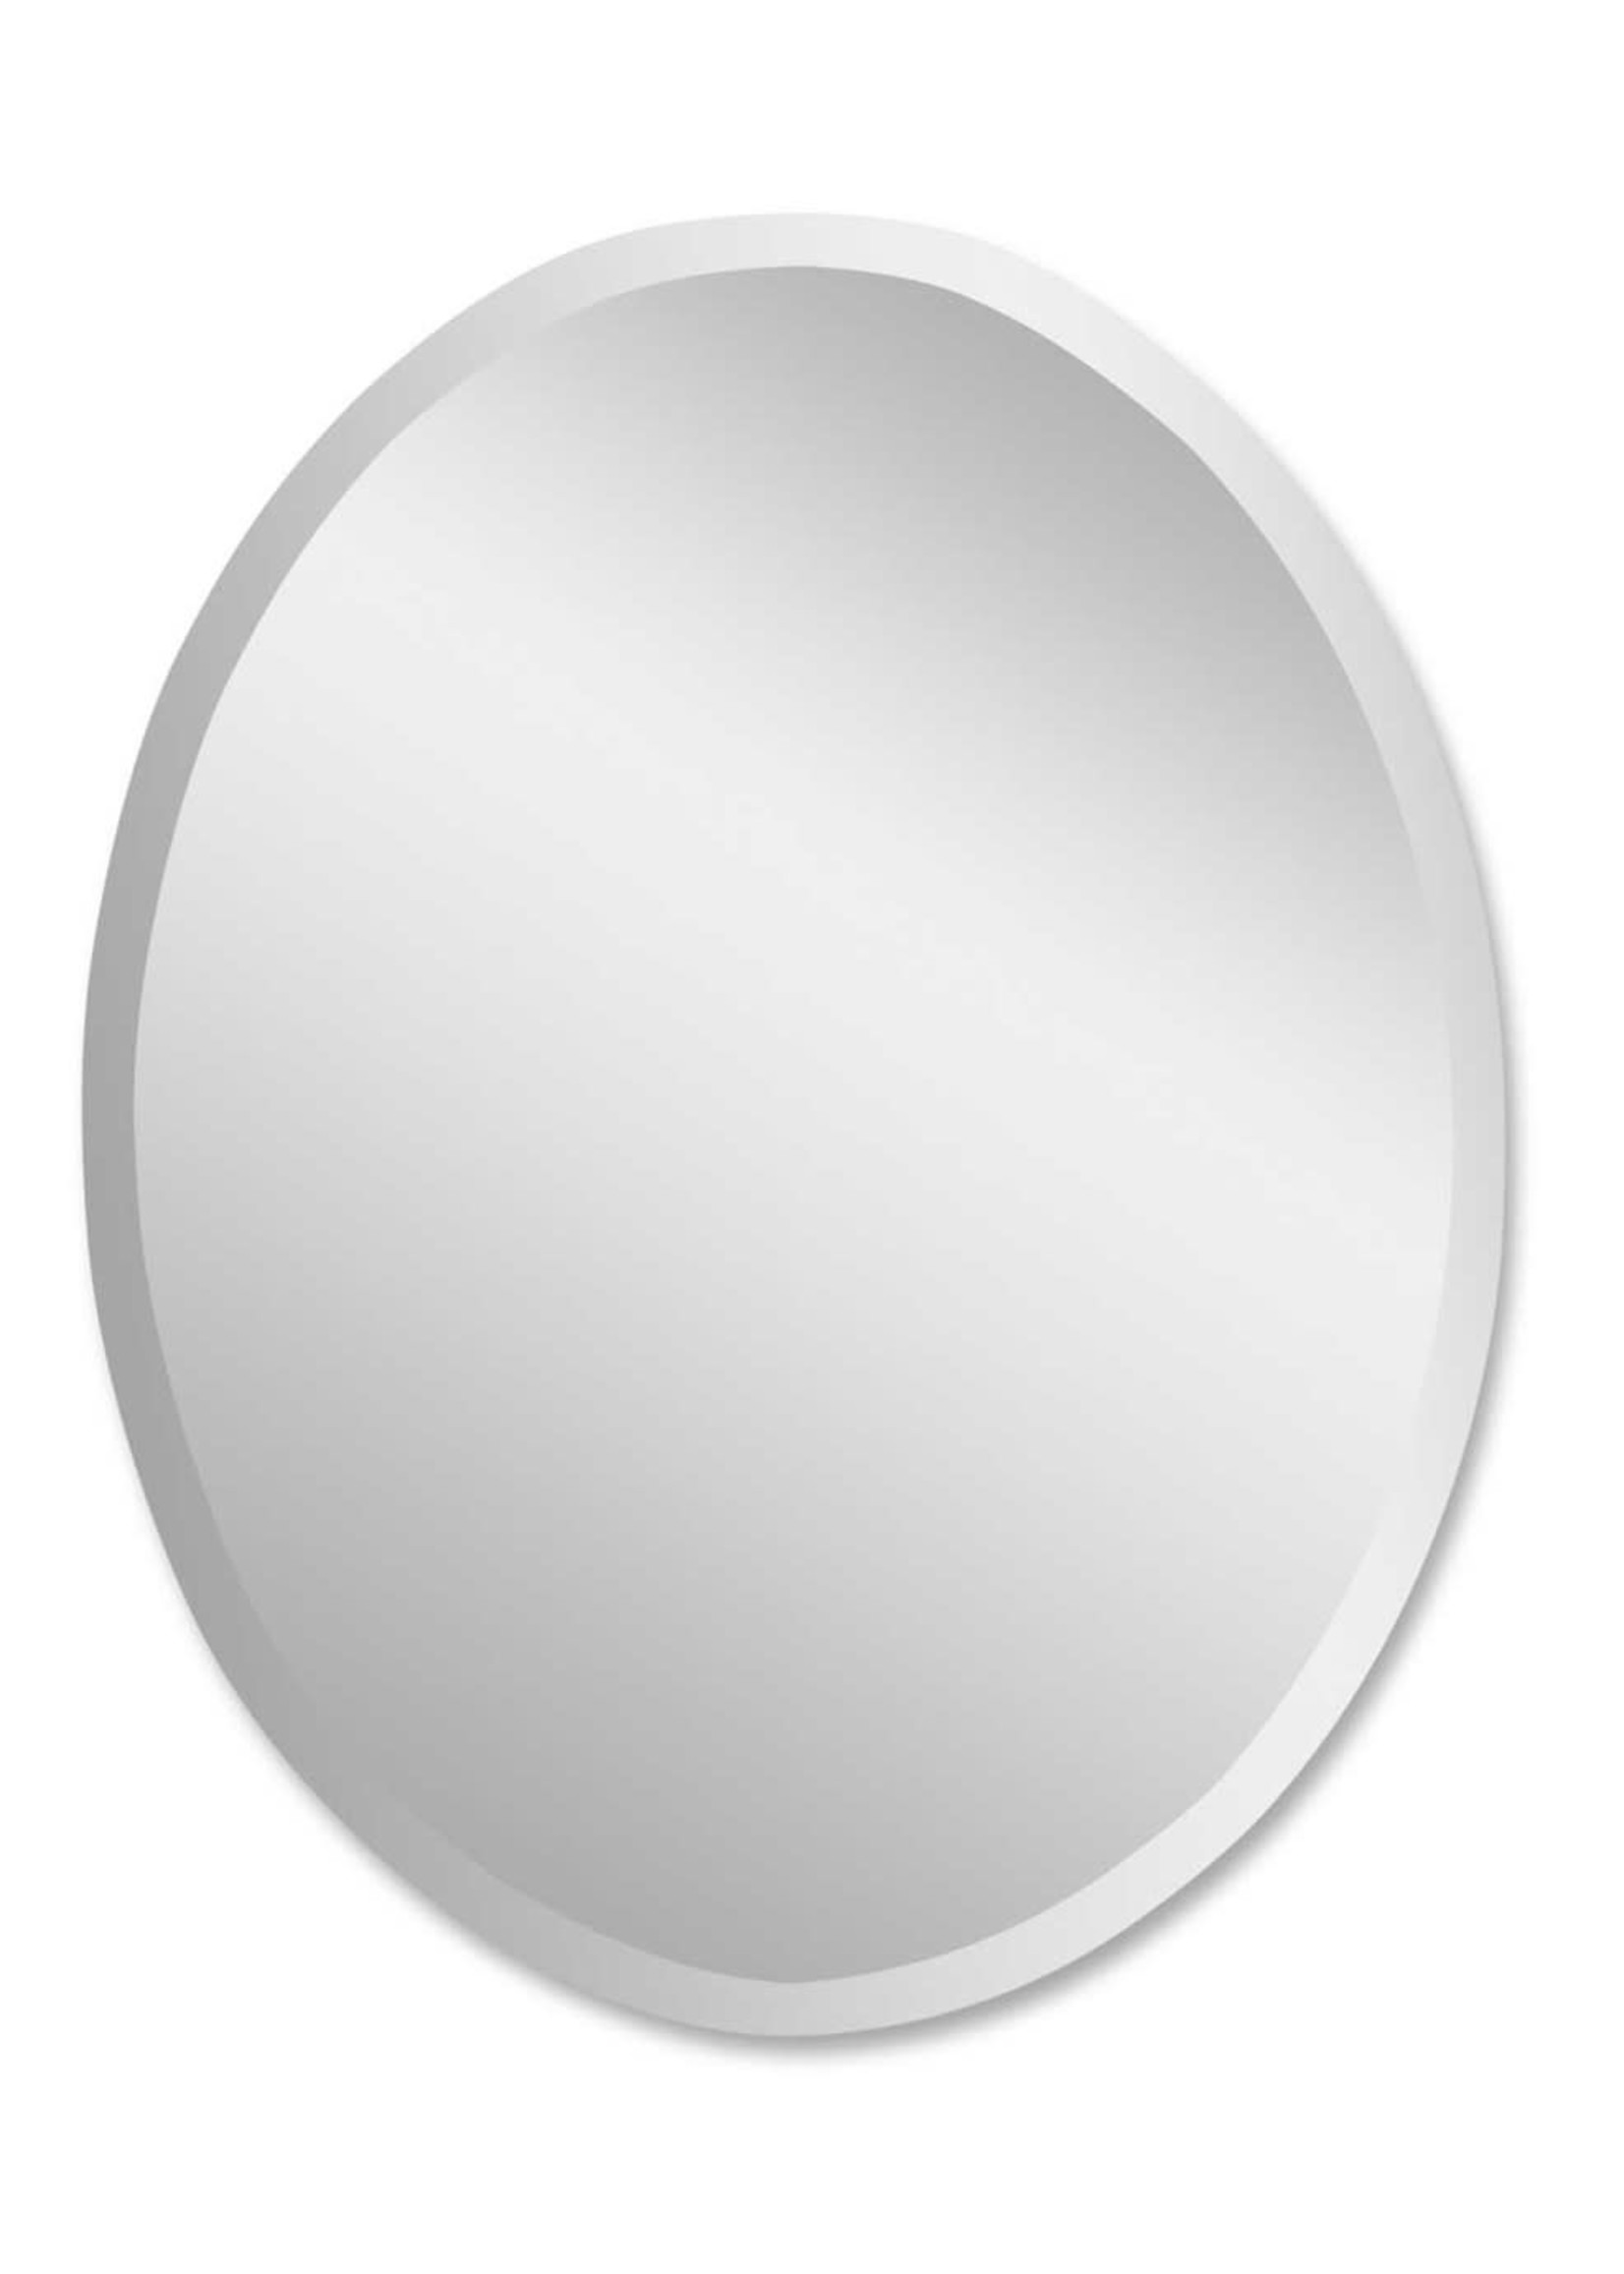 UTTERMOST LARGE OVAL MIRROR